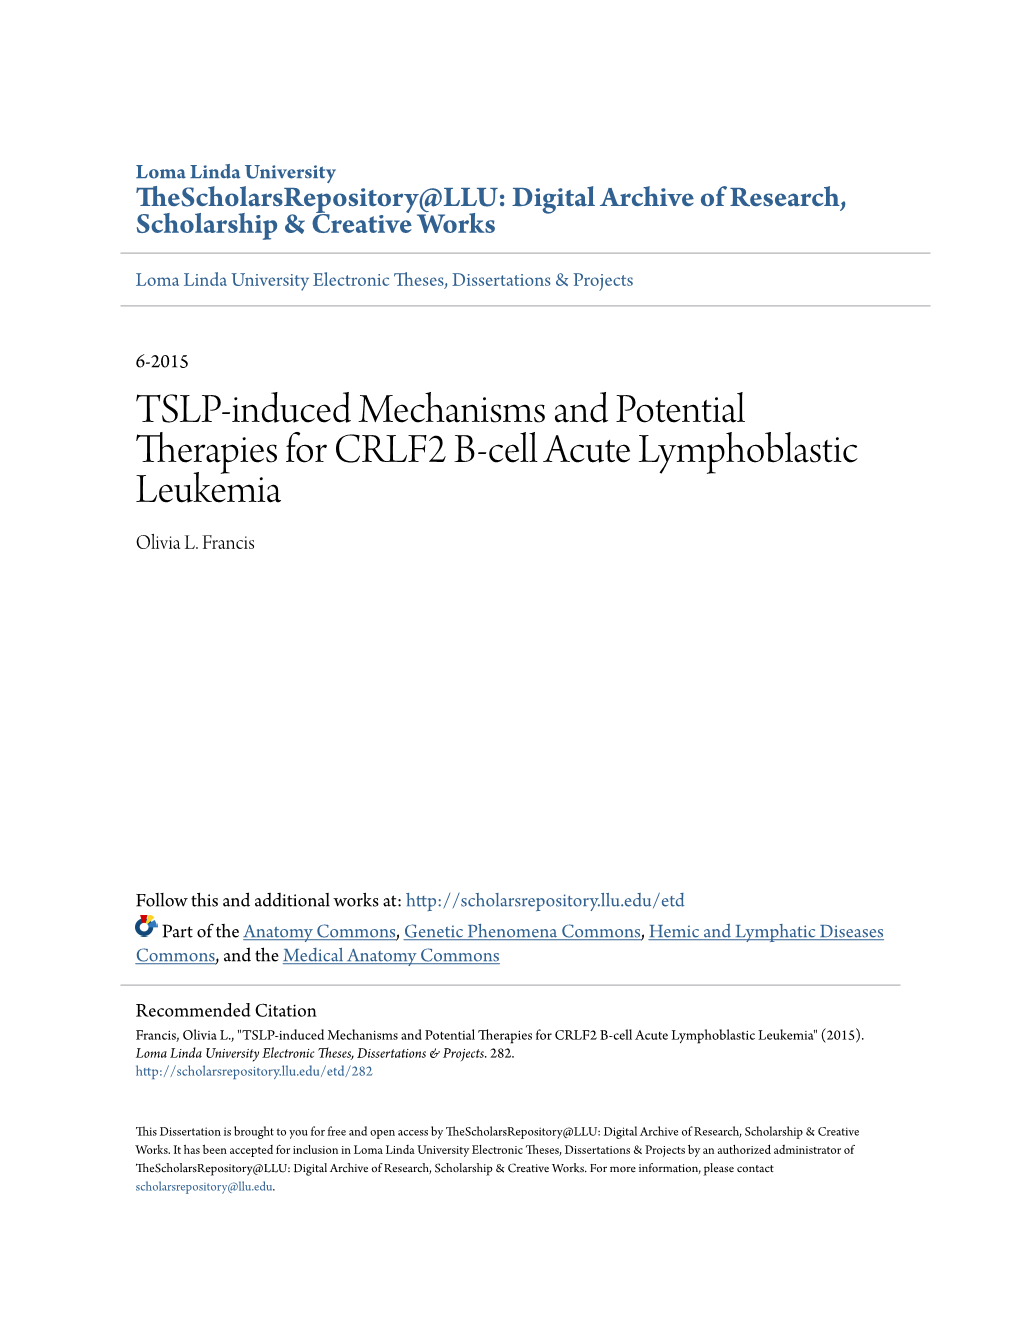 TSLP-Induced Mechanisms and Potential Therapies for CRLF2 B-Cell Acute Lymphoblastic Leukemia Olivia L